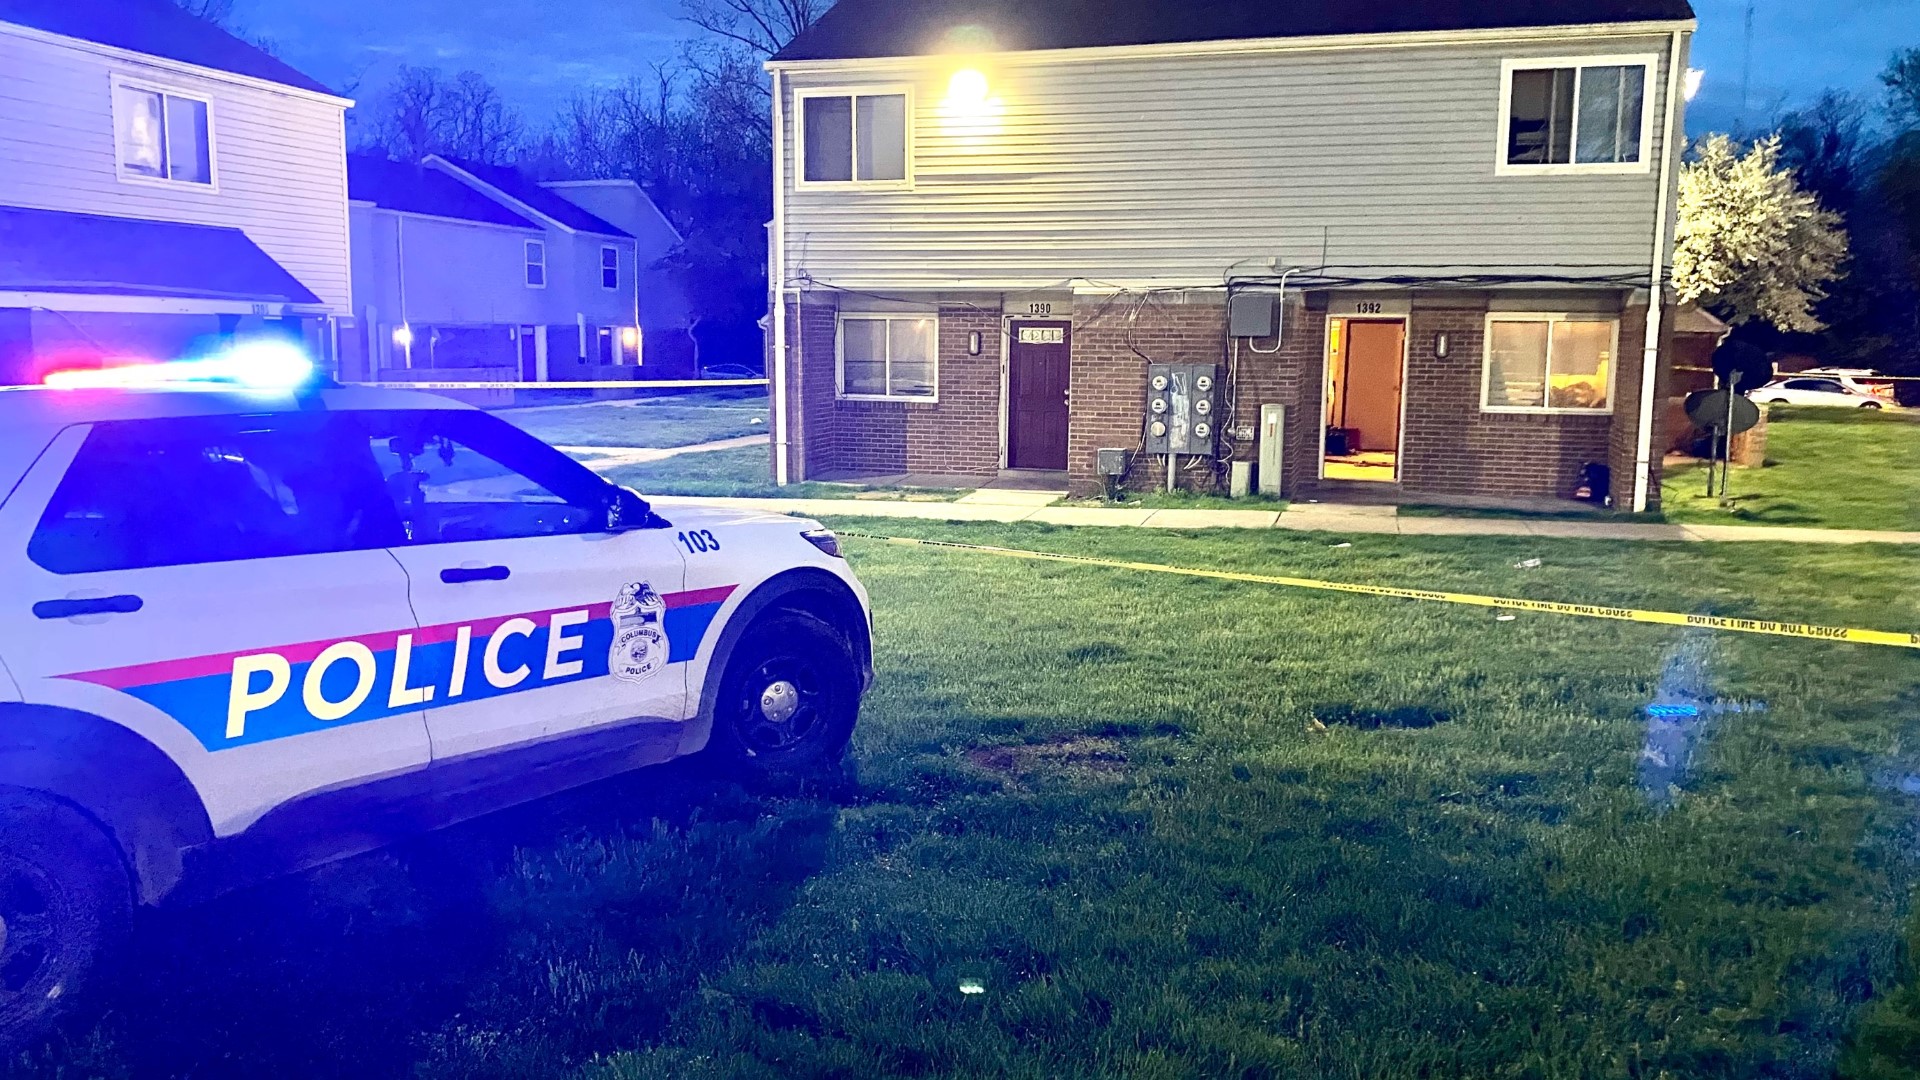 A woman is dead and a man is injured after a shooting in the Hilltop area early Monday morning.